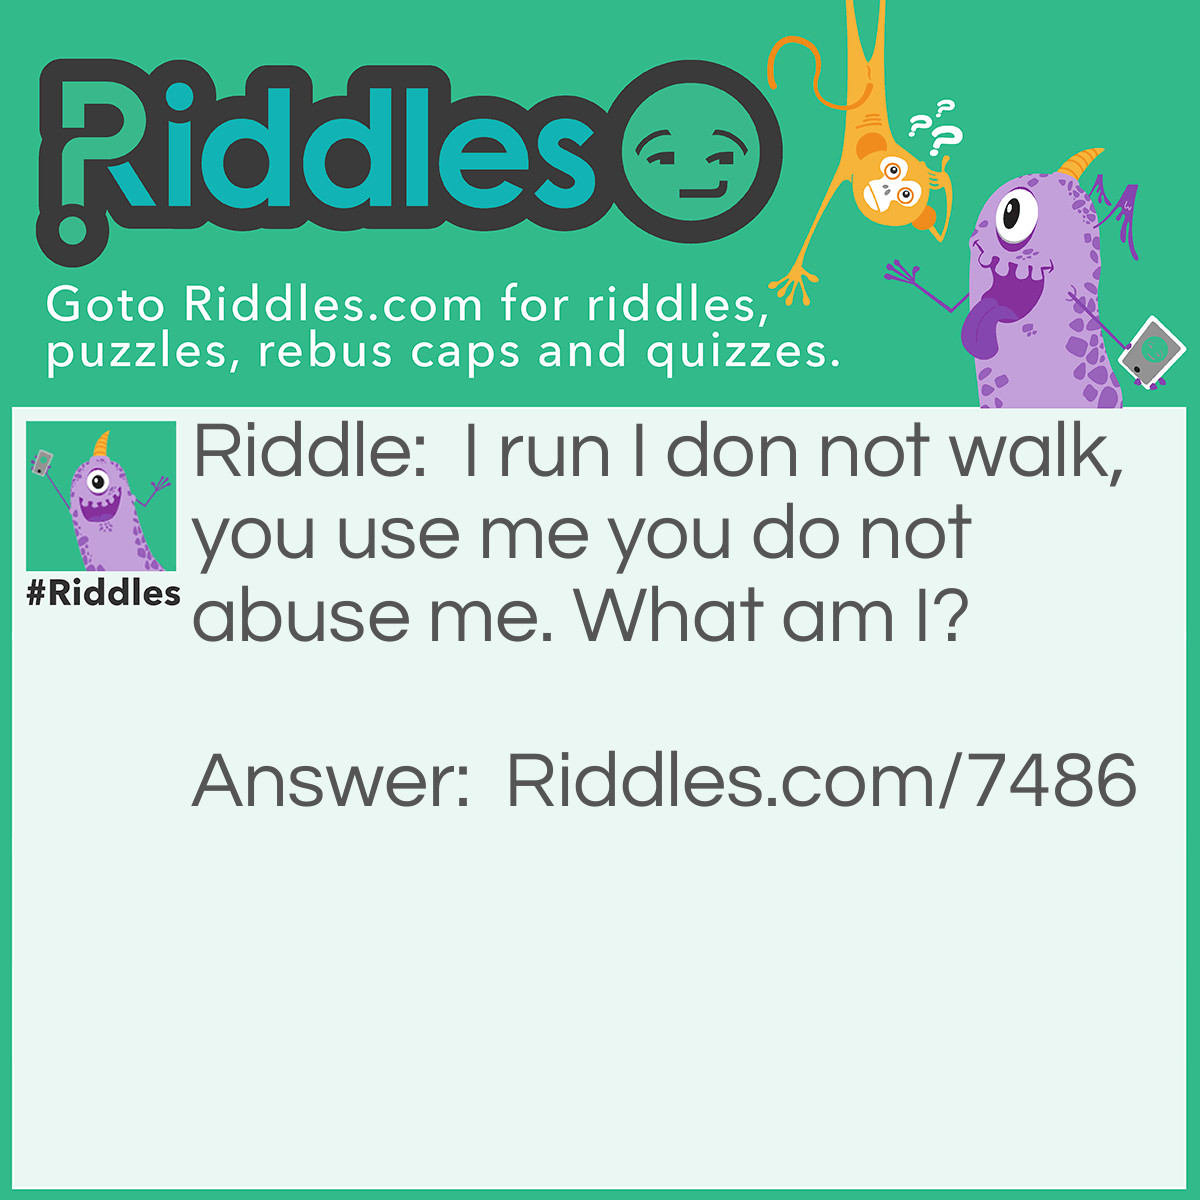 Riddle: I run I don not walk, you use me you do not abuse me. What am I? Answer: I Am A Nose